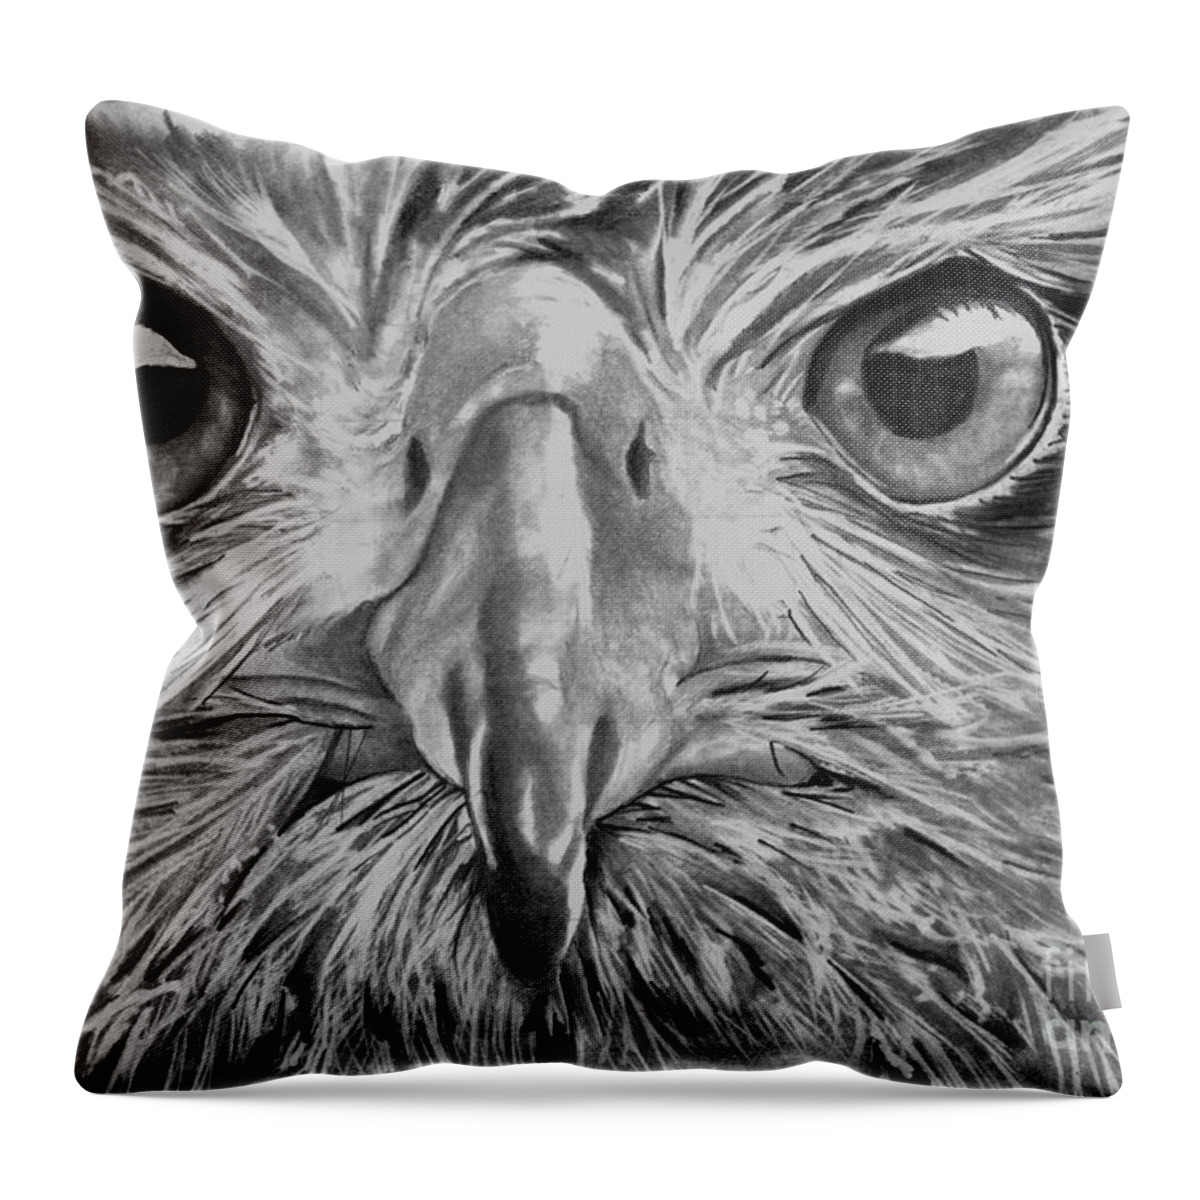 Graphite Throw Pillow featuring the drawing The Eyes Are On You by Bill Richards